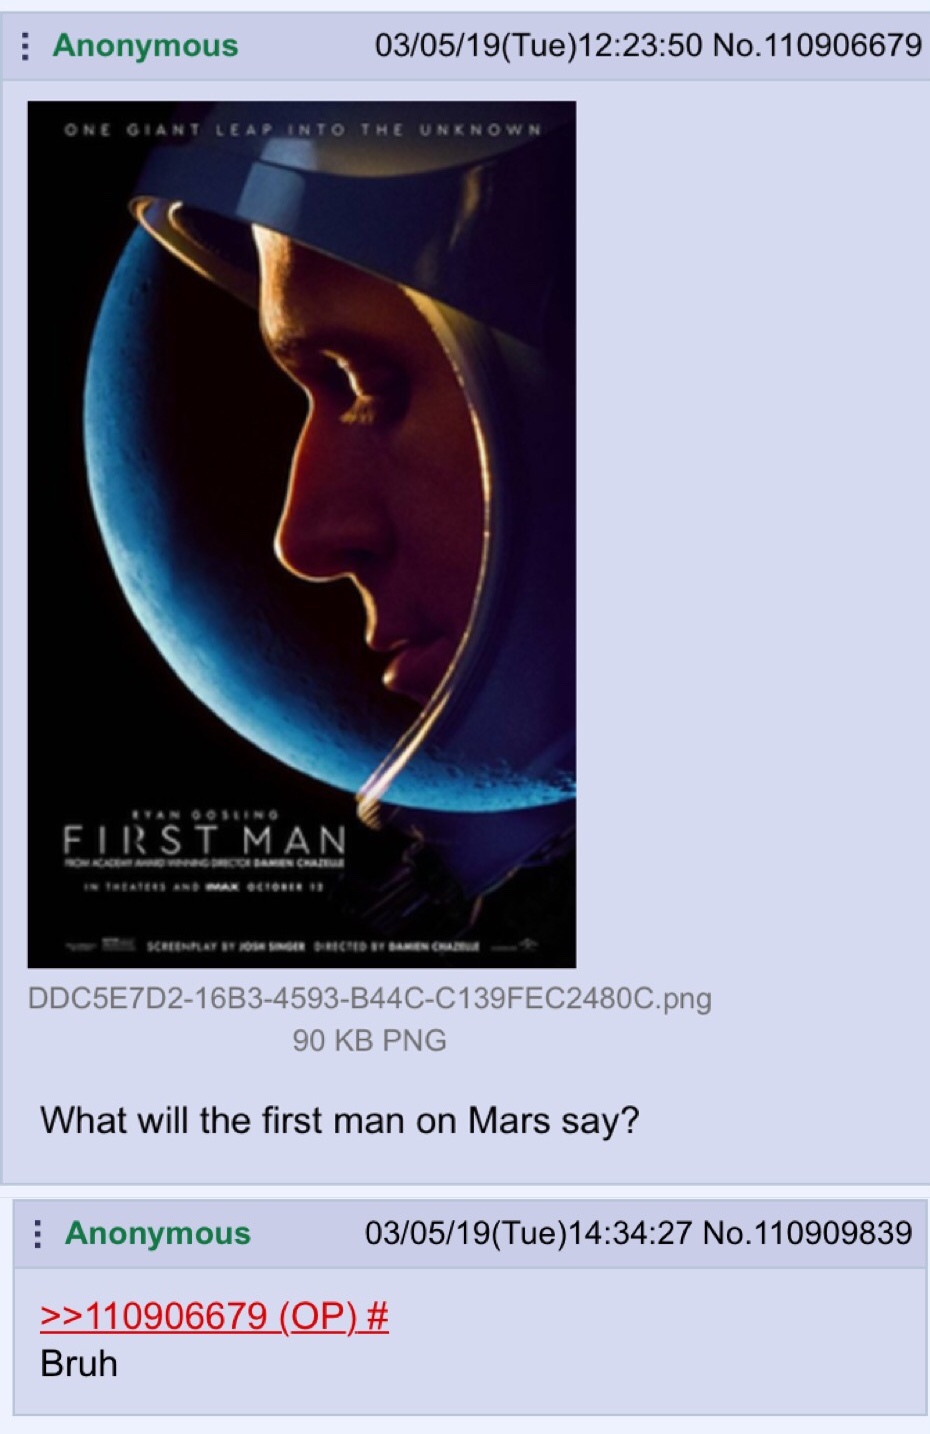 Will the first people born on Mars be considered aliens due to the effects of the changes the environment causes? Plus First Man was snubbed for best soundtrack - meme